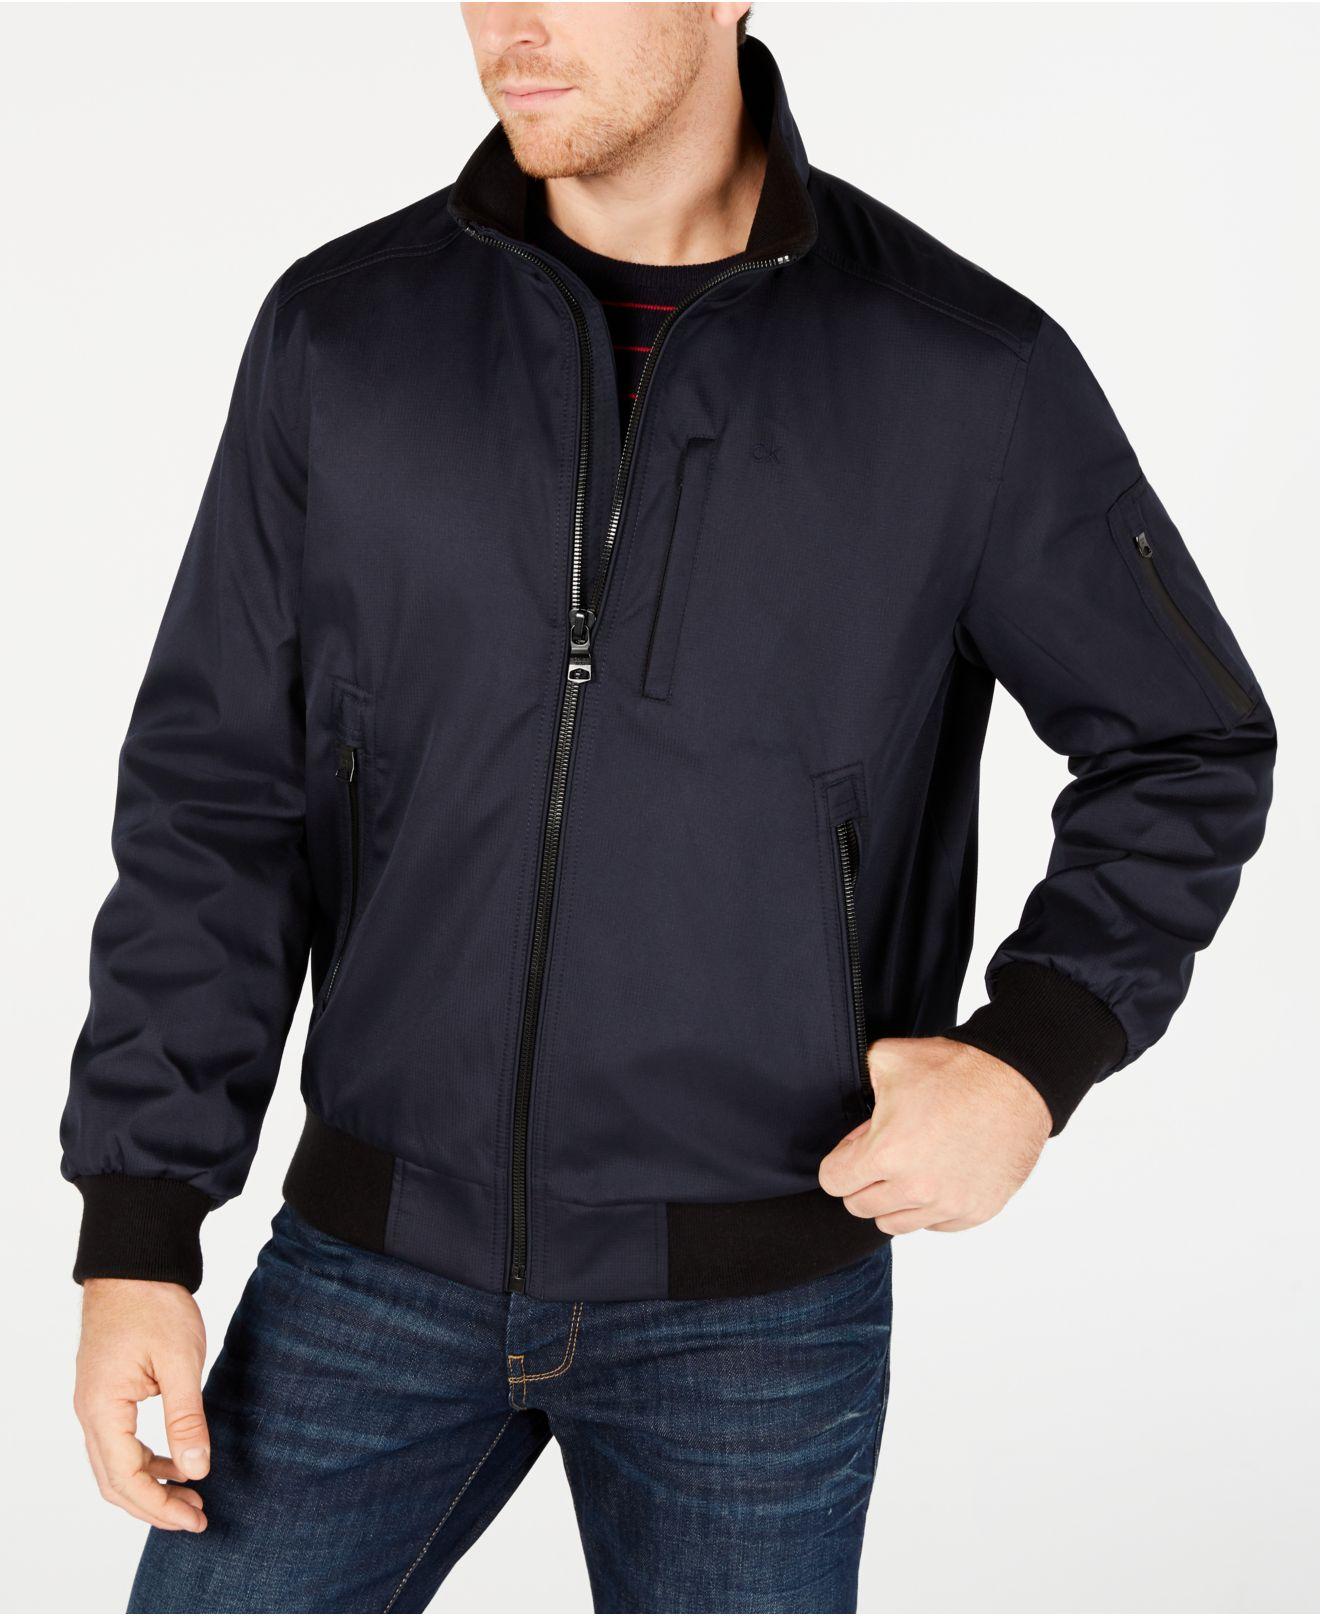 Calvin Klein Synthetic Ripstop Bomber Jacket in Blue for Men - Lyst